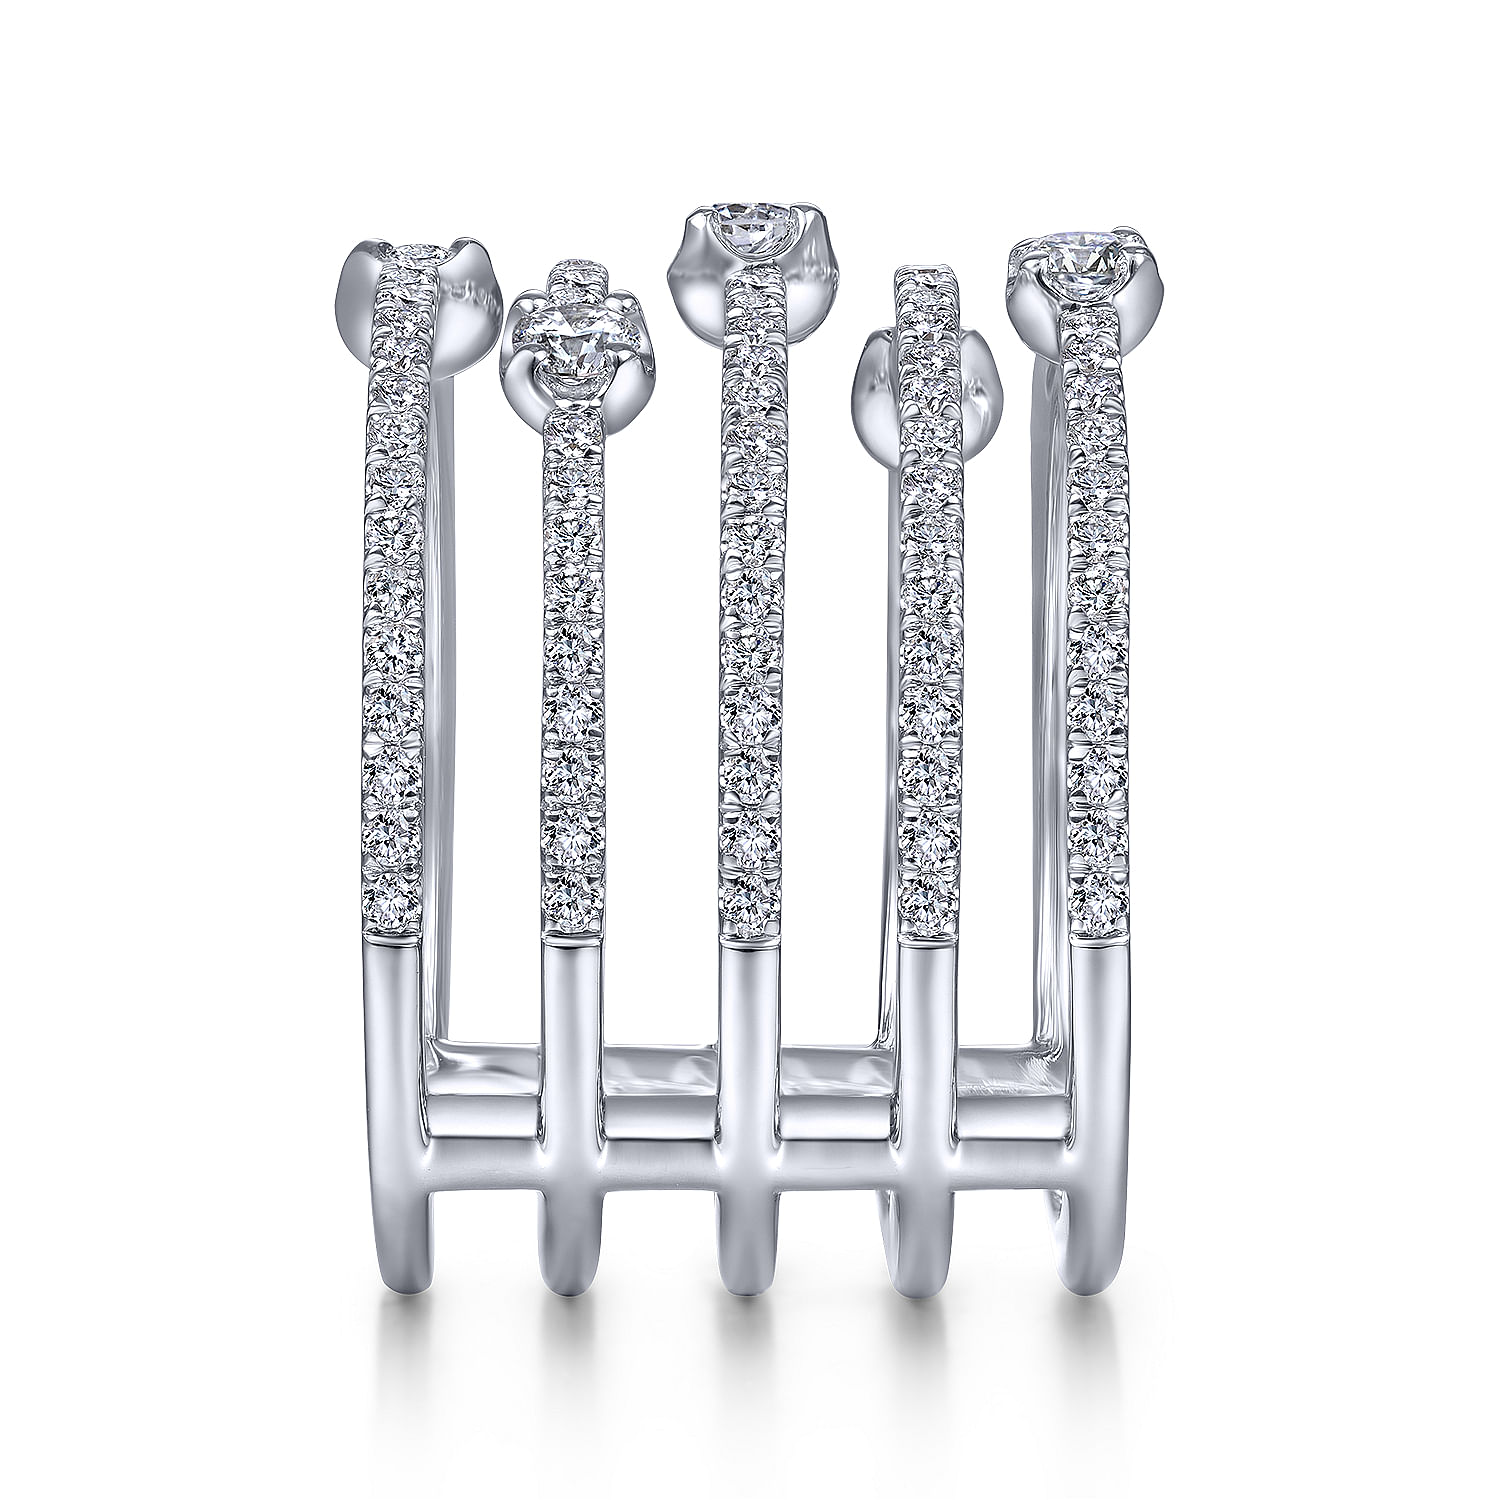 14K White Gold Five Row Diamond Station Wide Band